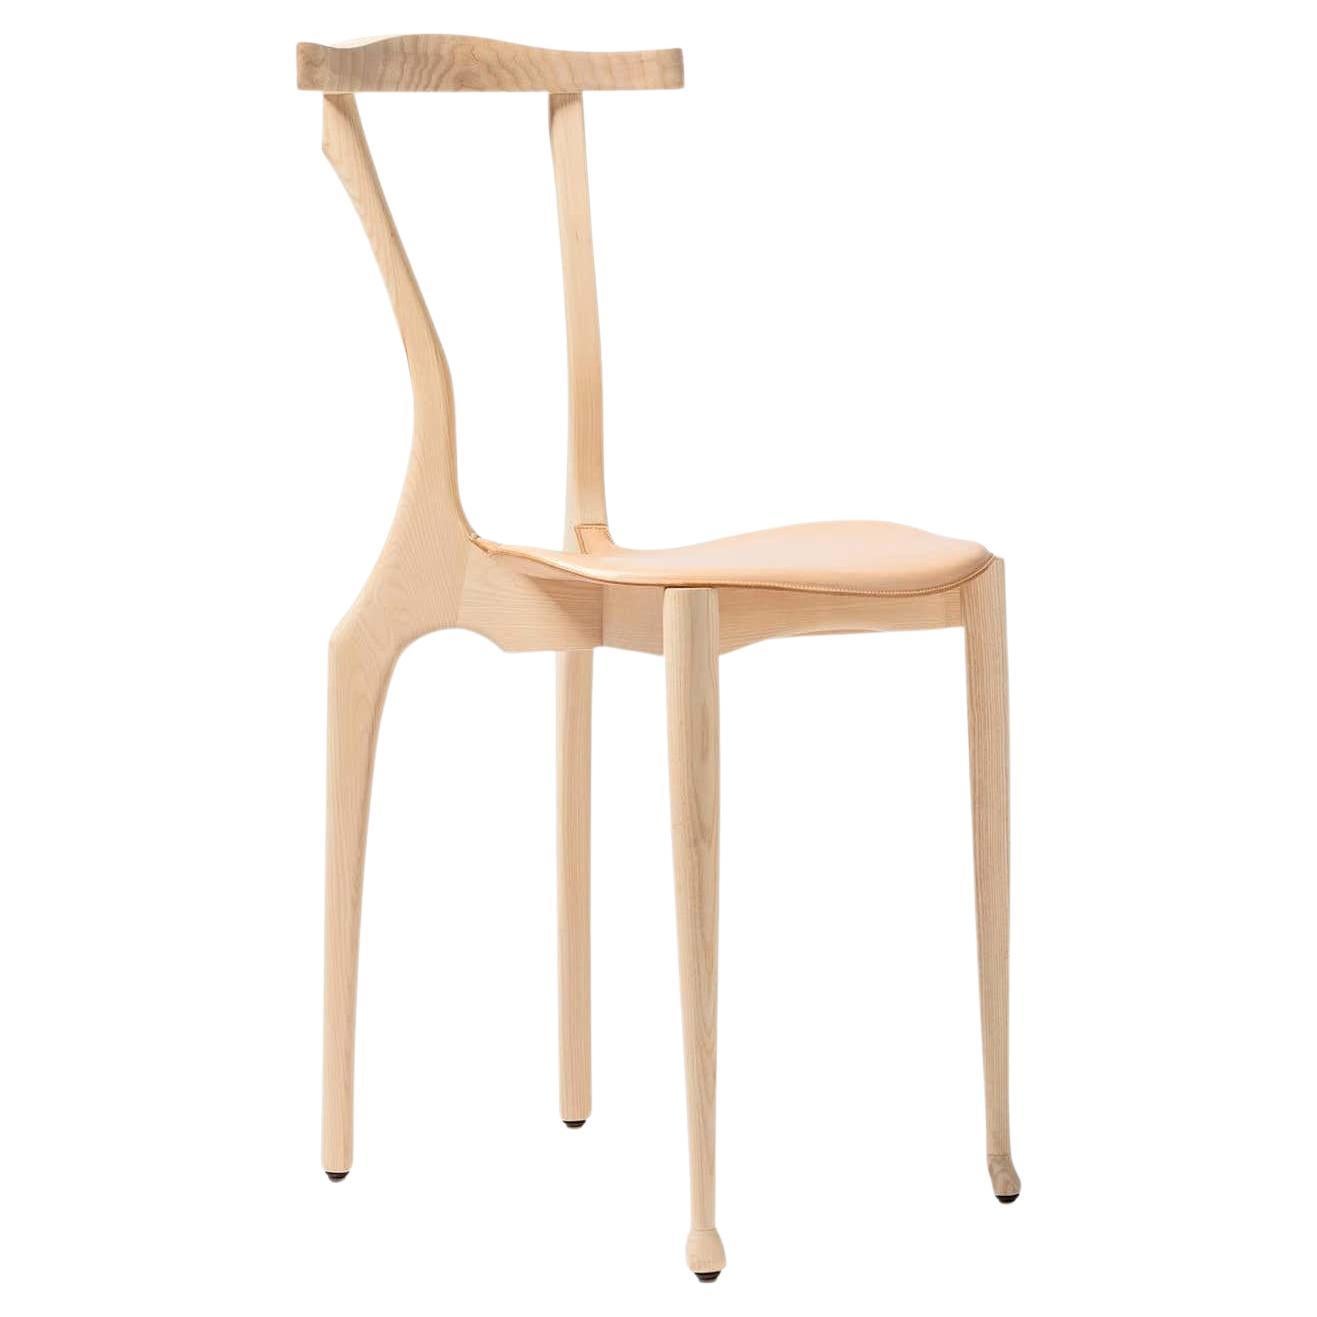 Ok! 21 Century Wood Gaulinetta Chair with Natural Wood Varnished Finish For Sale